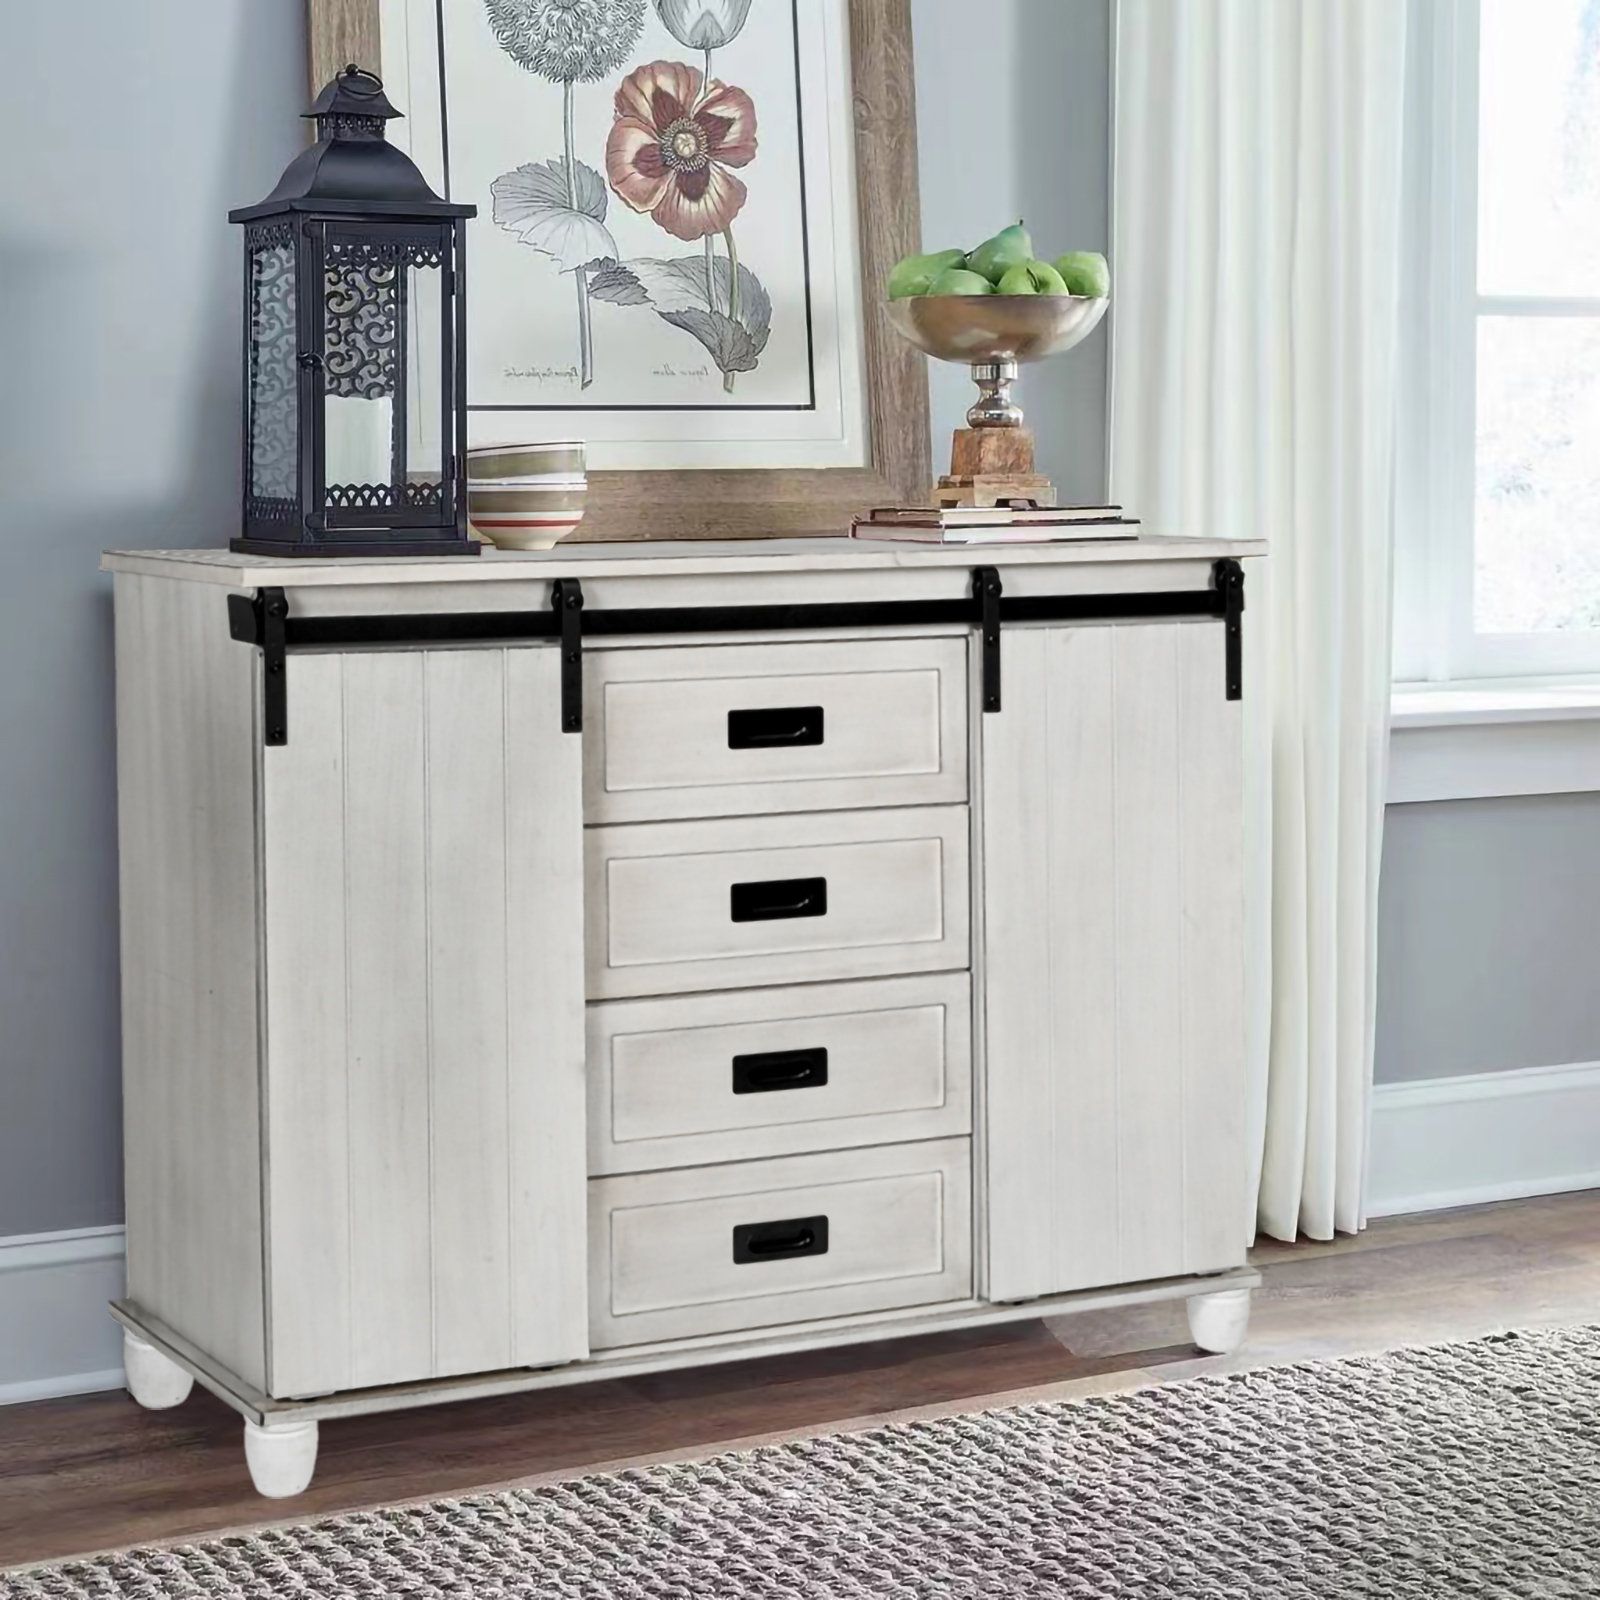 Gracie Oaks Redgate 45" Wide White Storage Cabinet Sideboard With 4 Drawers  And 2 Sliding Barn Doors & Reviews | Wayfair In Sideboards Double Barn Door Buffet (View 7 of 20)